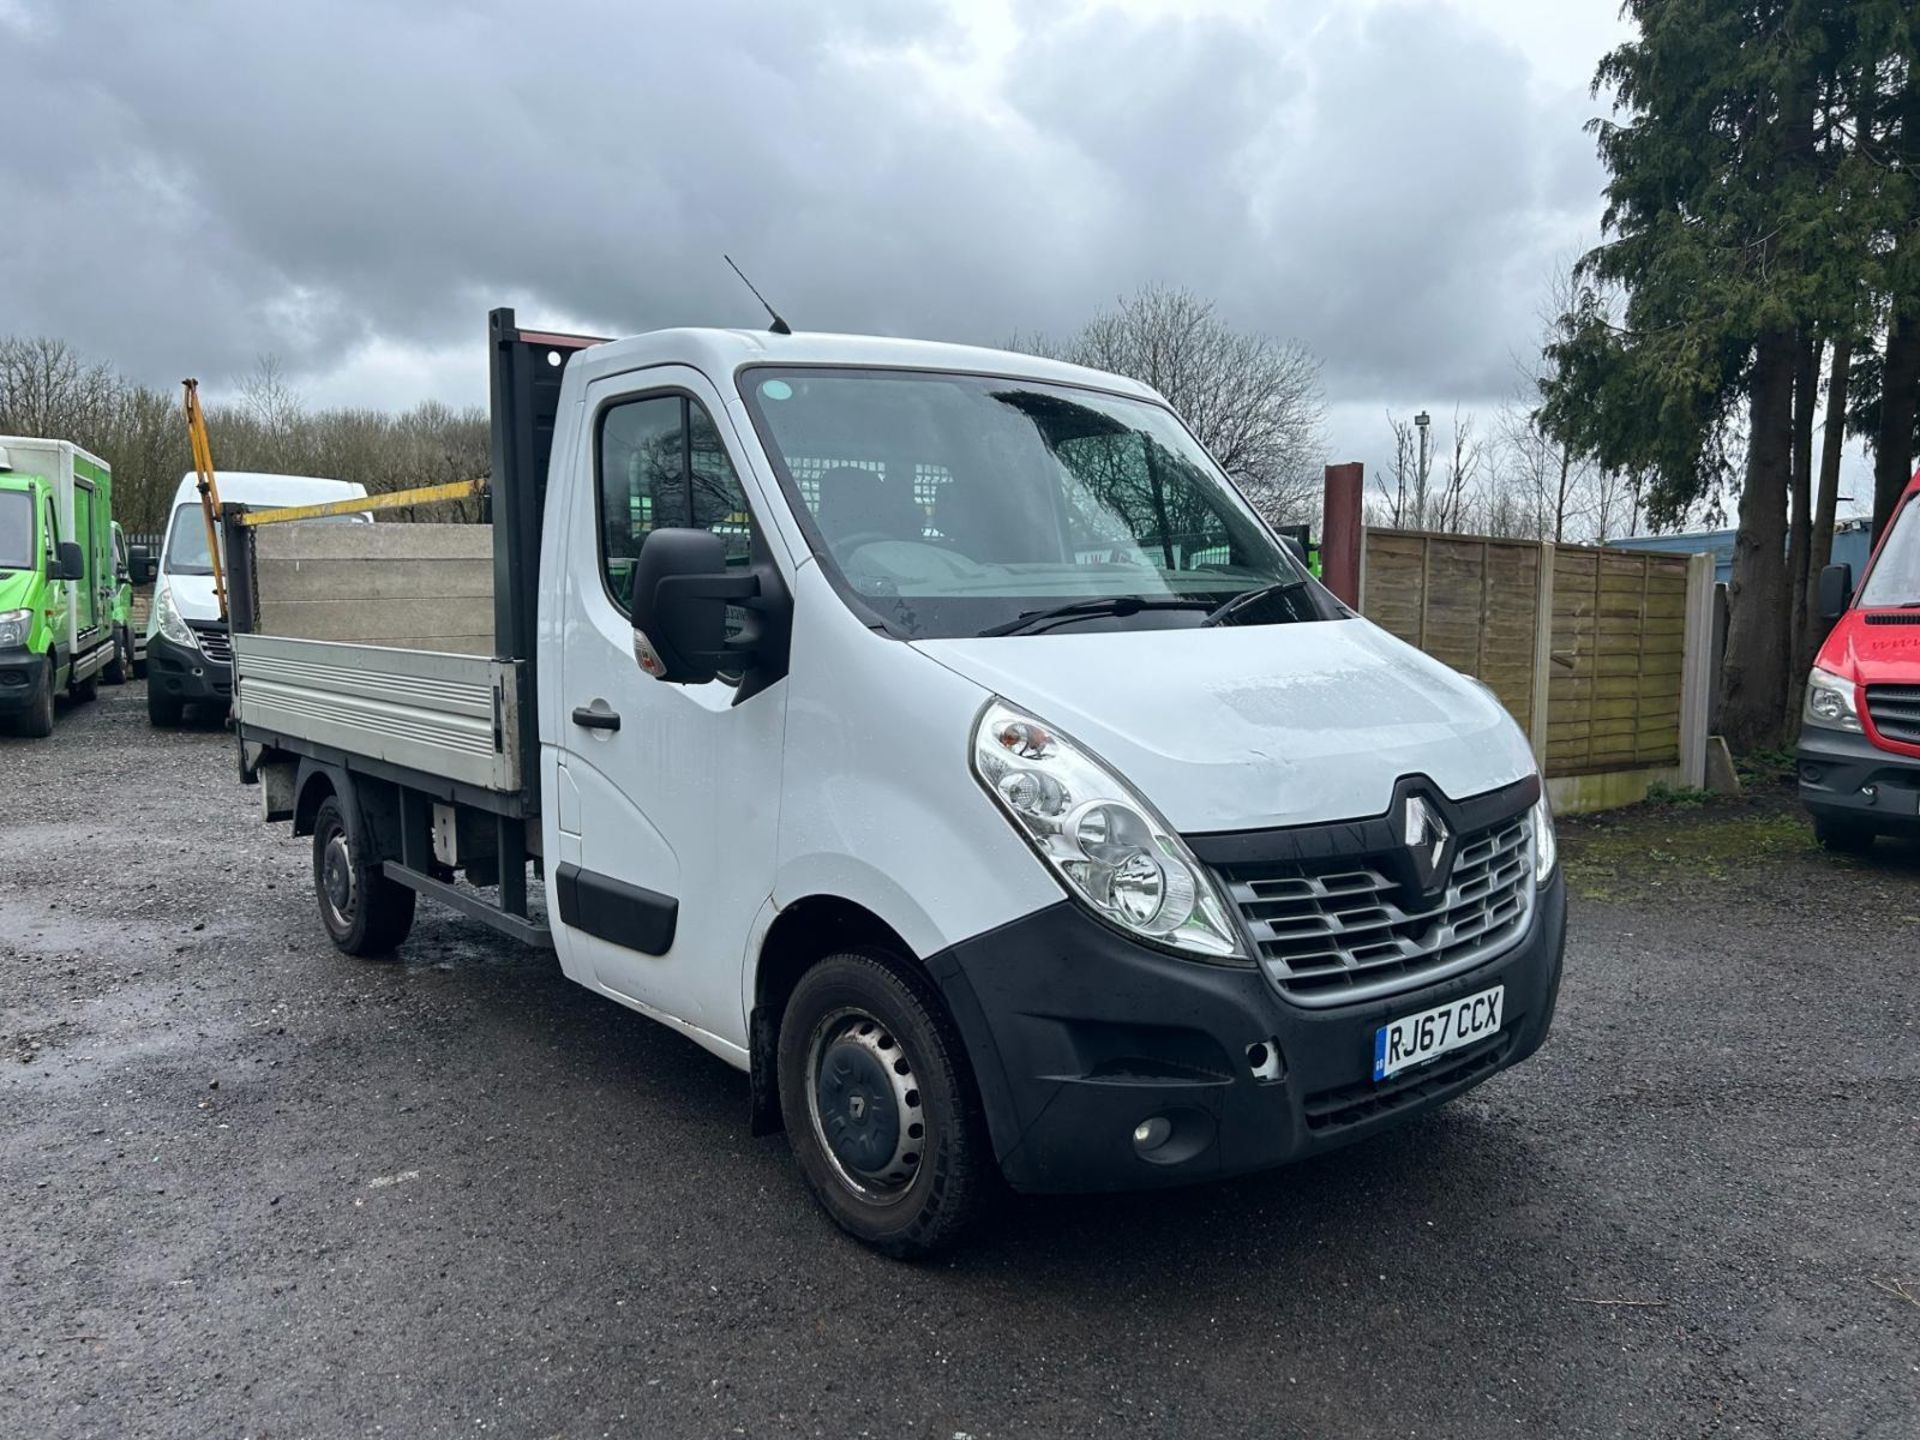 >>>SPECIAL CLEARANCE<<< 2018 RENAULT MASTER ML35 BUSINESS DCI 125 L2H1 MWB